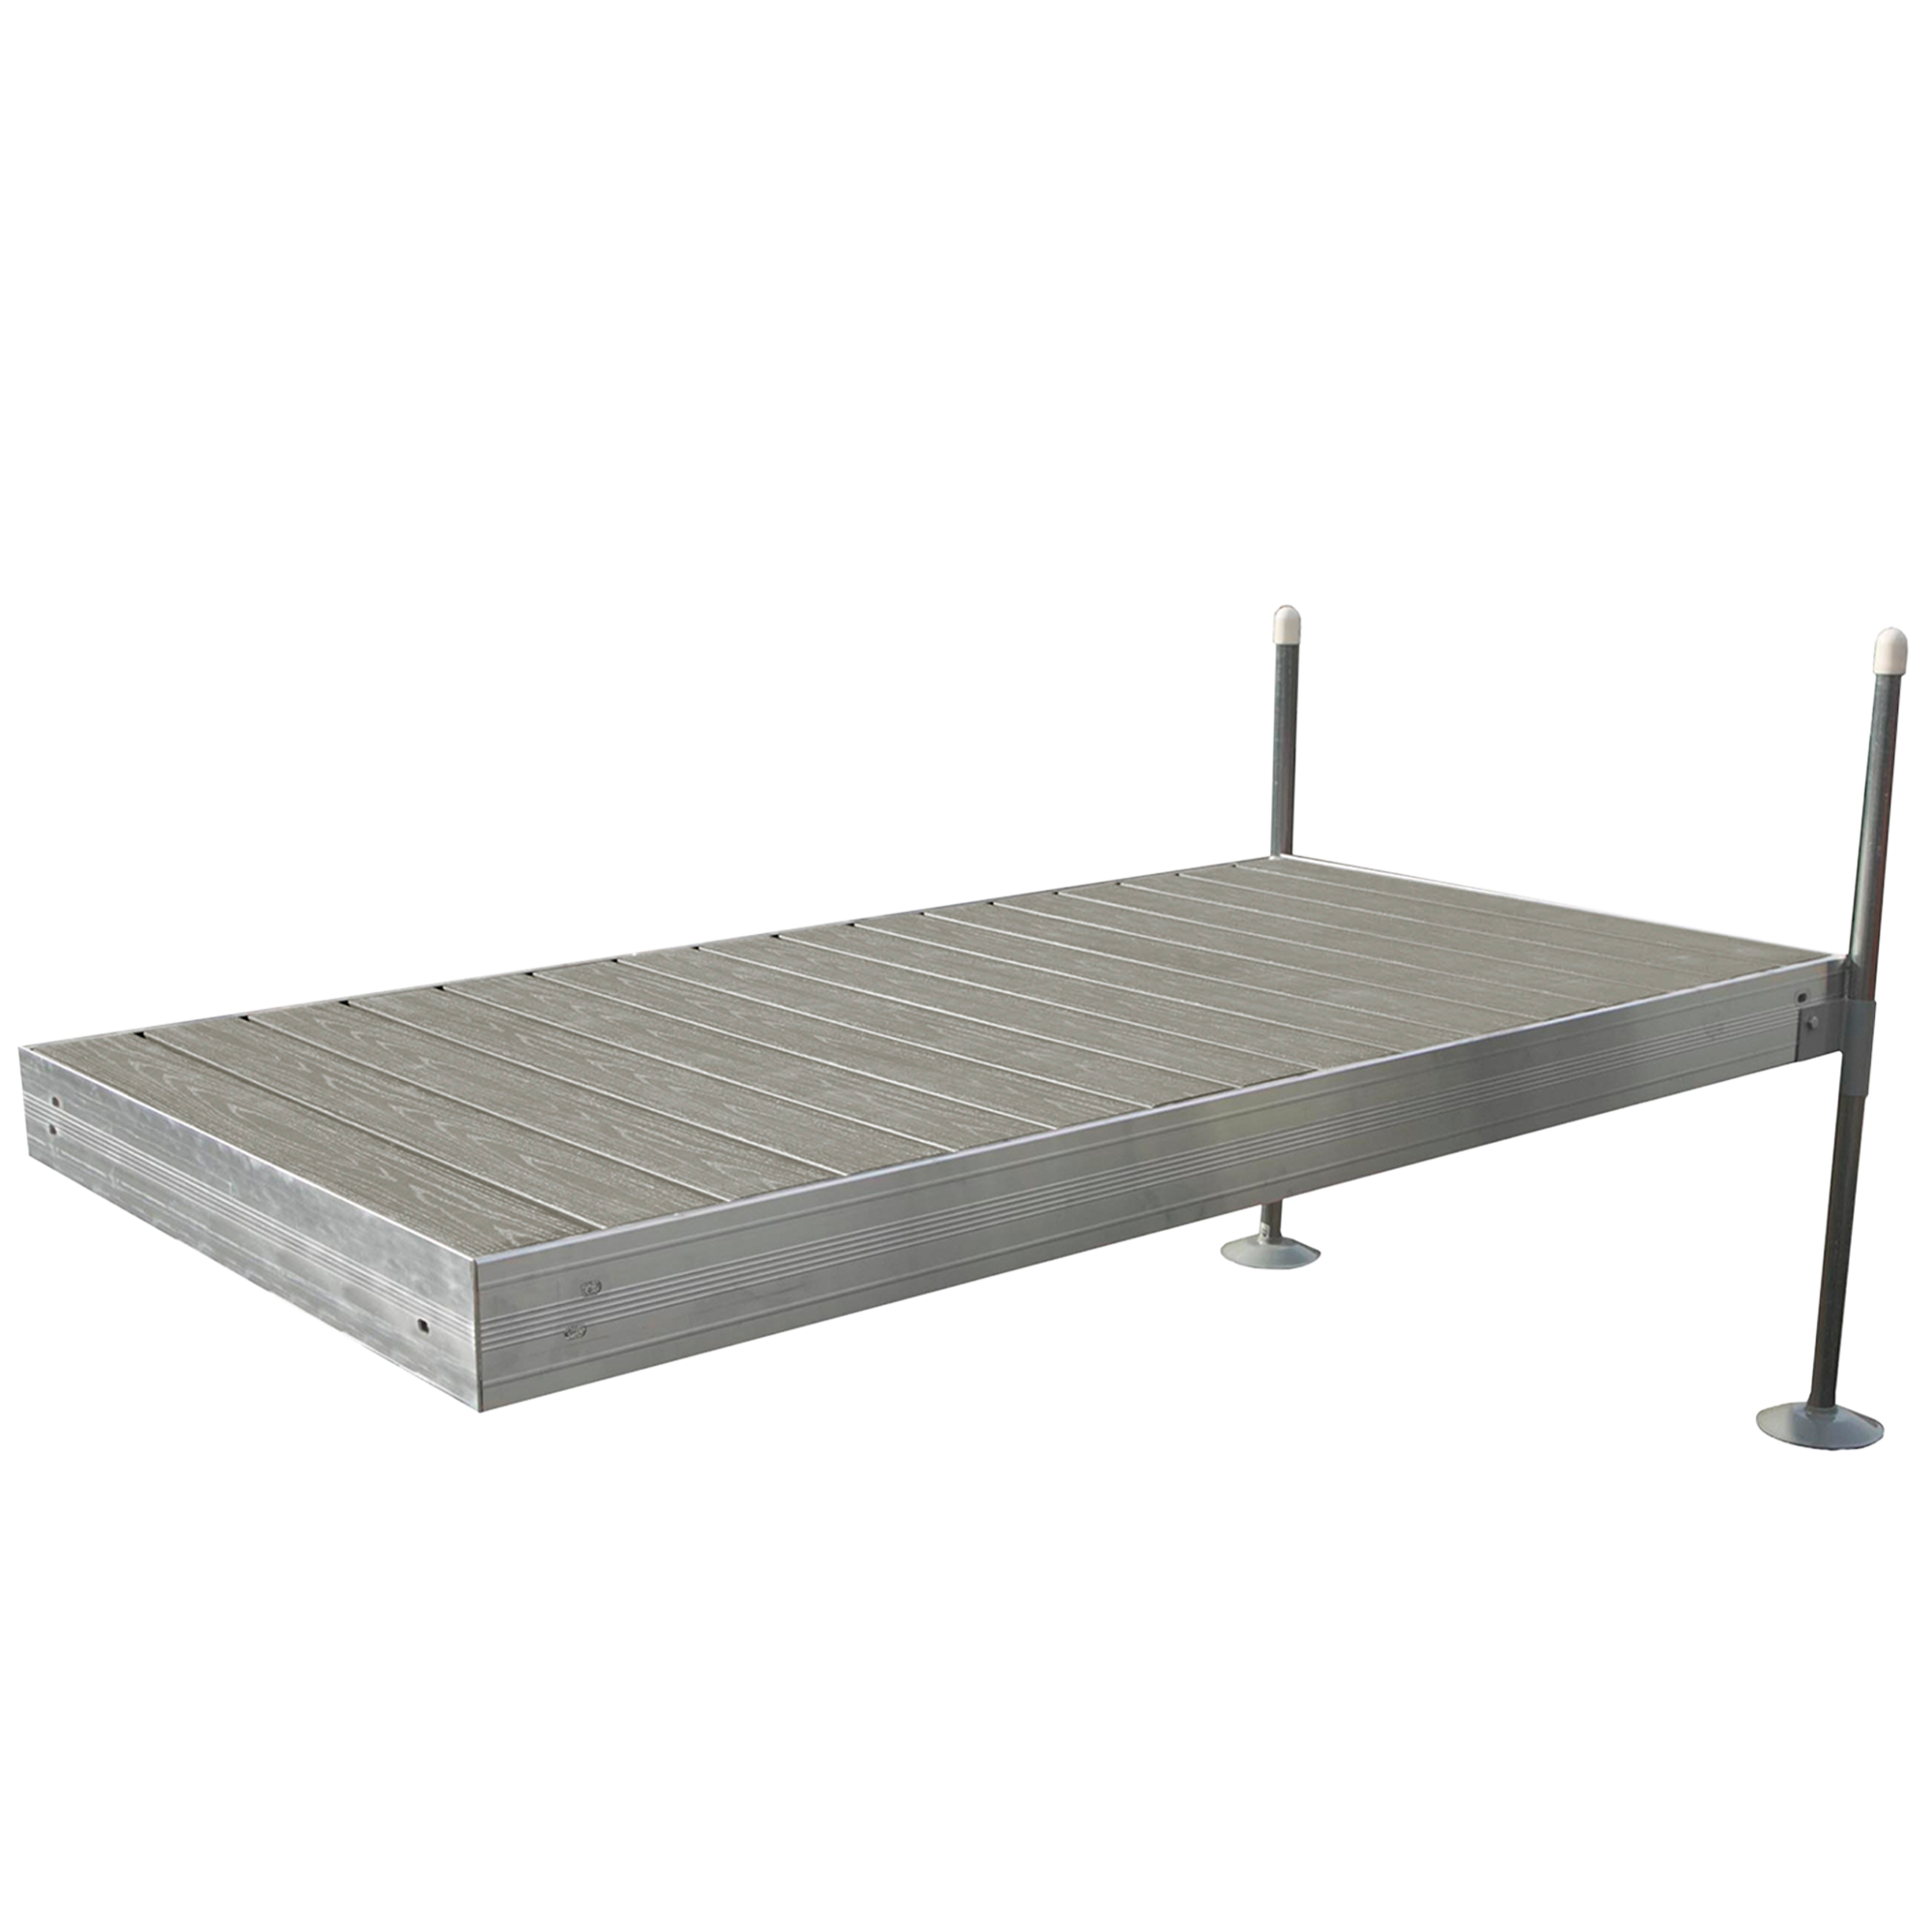 8' Straight Boat Dock System with Aluminum Frame and Gray Composite Decking